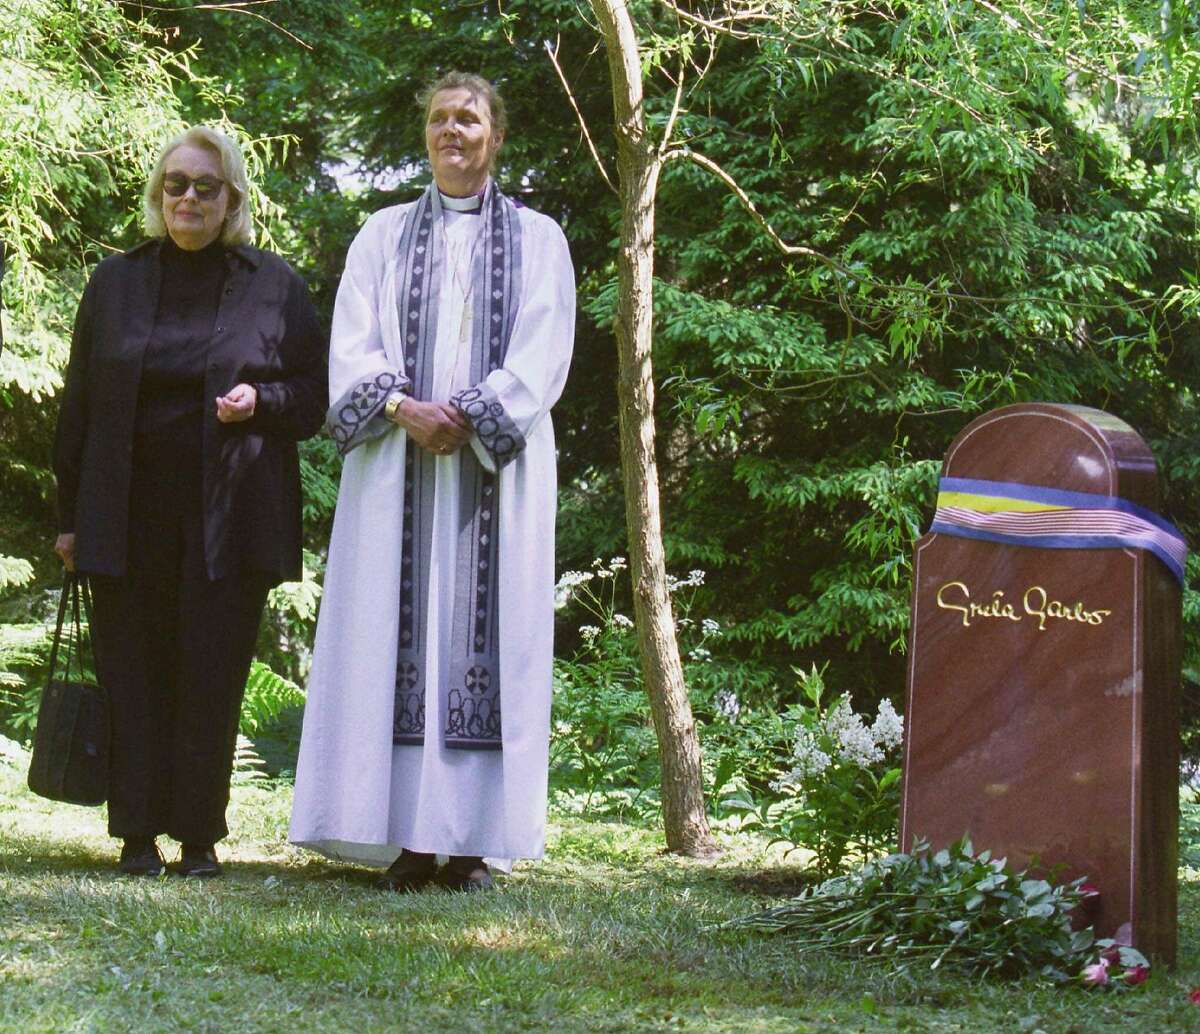 Gray Reisfield, left, and Bishop Caroline Krook stand next to the tombstone of Greta Garbo after the memorial service at the Woodland Cemetery in Stockholm, Sweden, Thursday June 17, 1999. Greta Garbo's ashes were interred in the Woodlands Cemetery Wednesday. Gray Reisfield is the niece and only heir of the 1930s Hollywood film legend. (AP photo/Pressens Bild/Tobias Rostlund) SWEDEN OUT MAGAZINES OUT NO SALES TV OUT